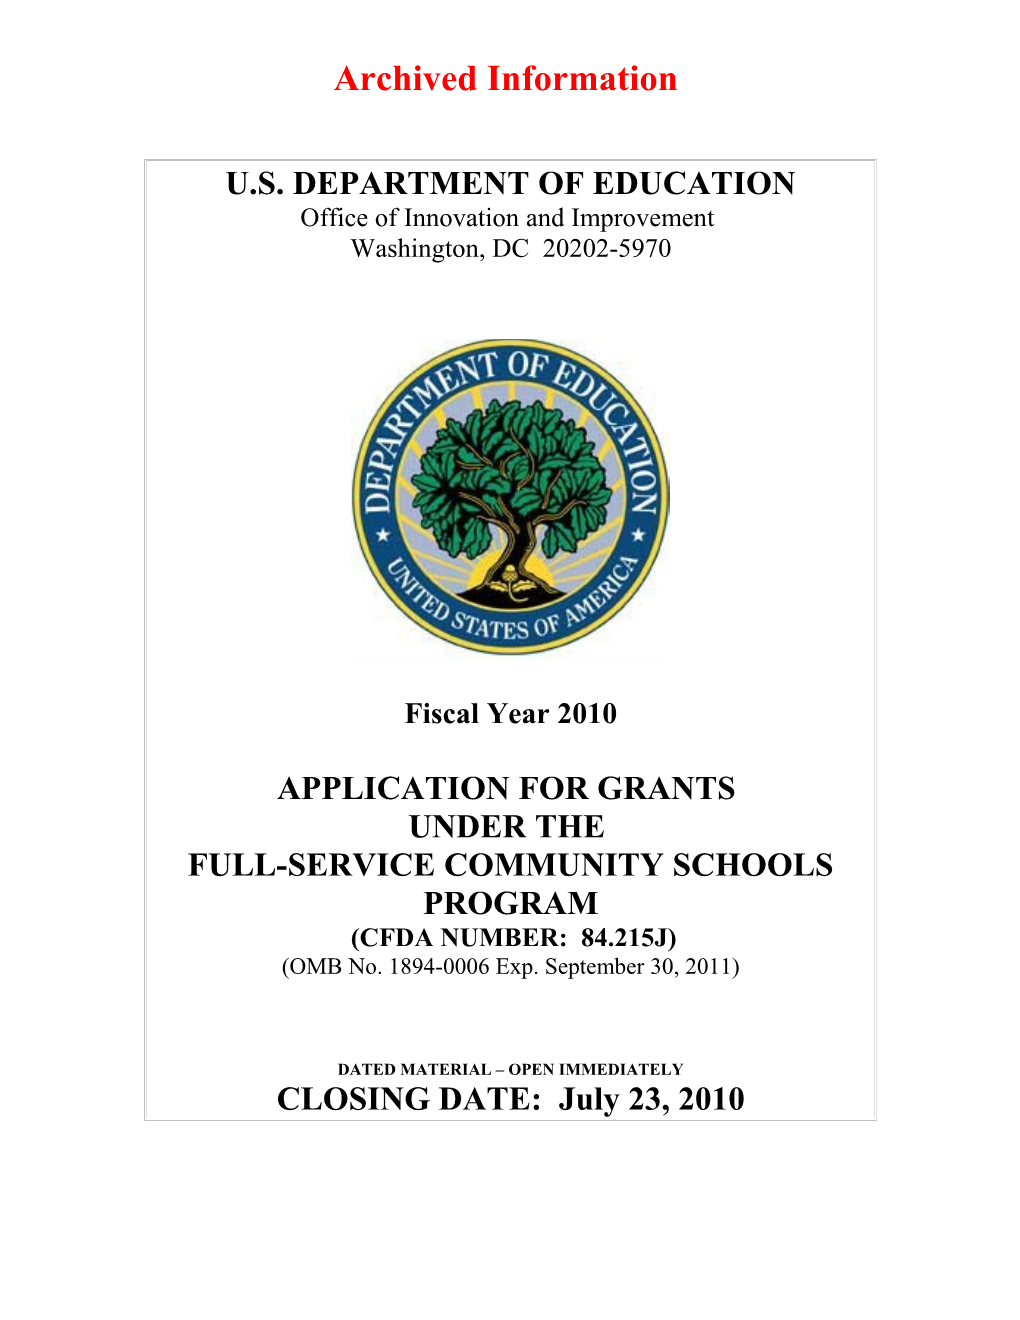 Archived Information: FY2010 Full-Service Community Schools Application Package (MS Word)